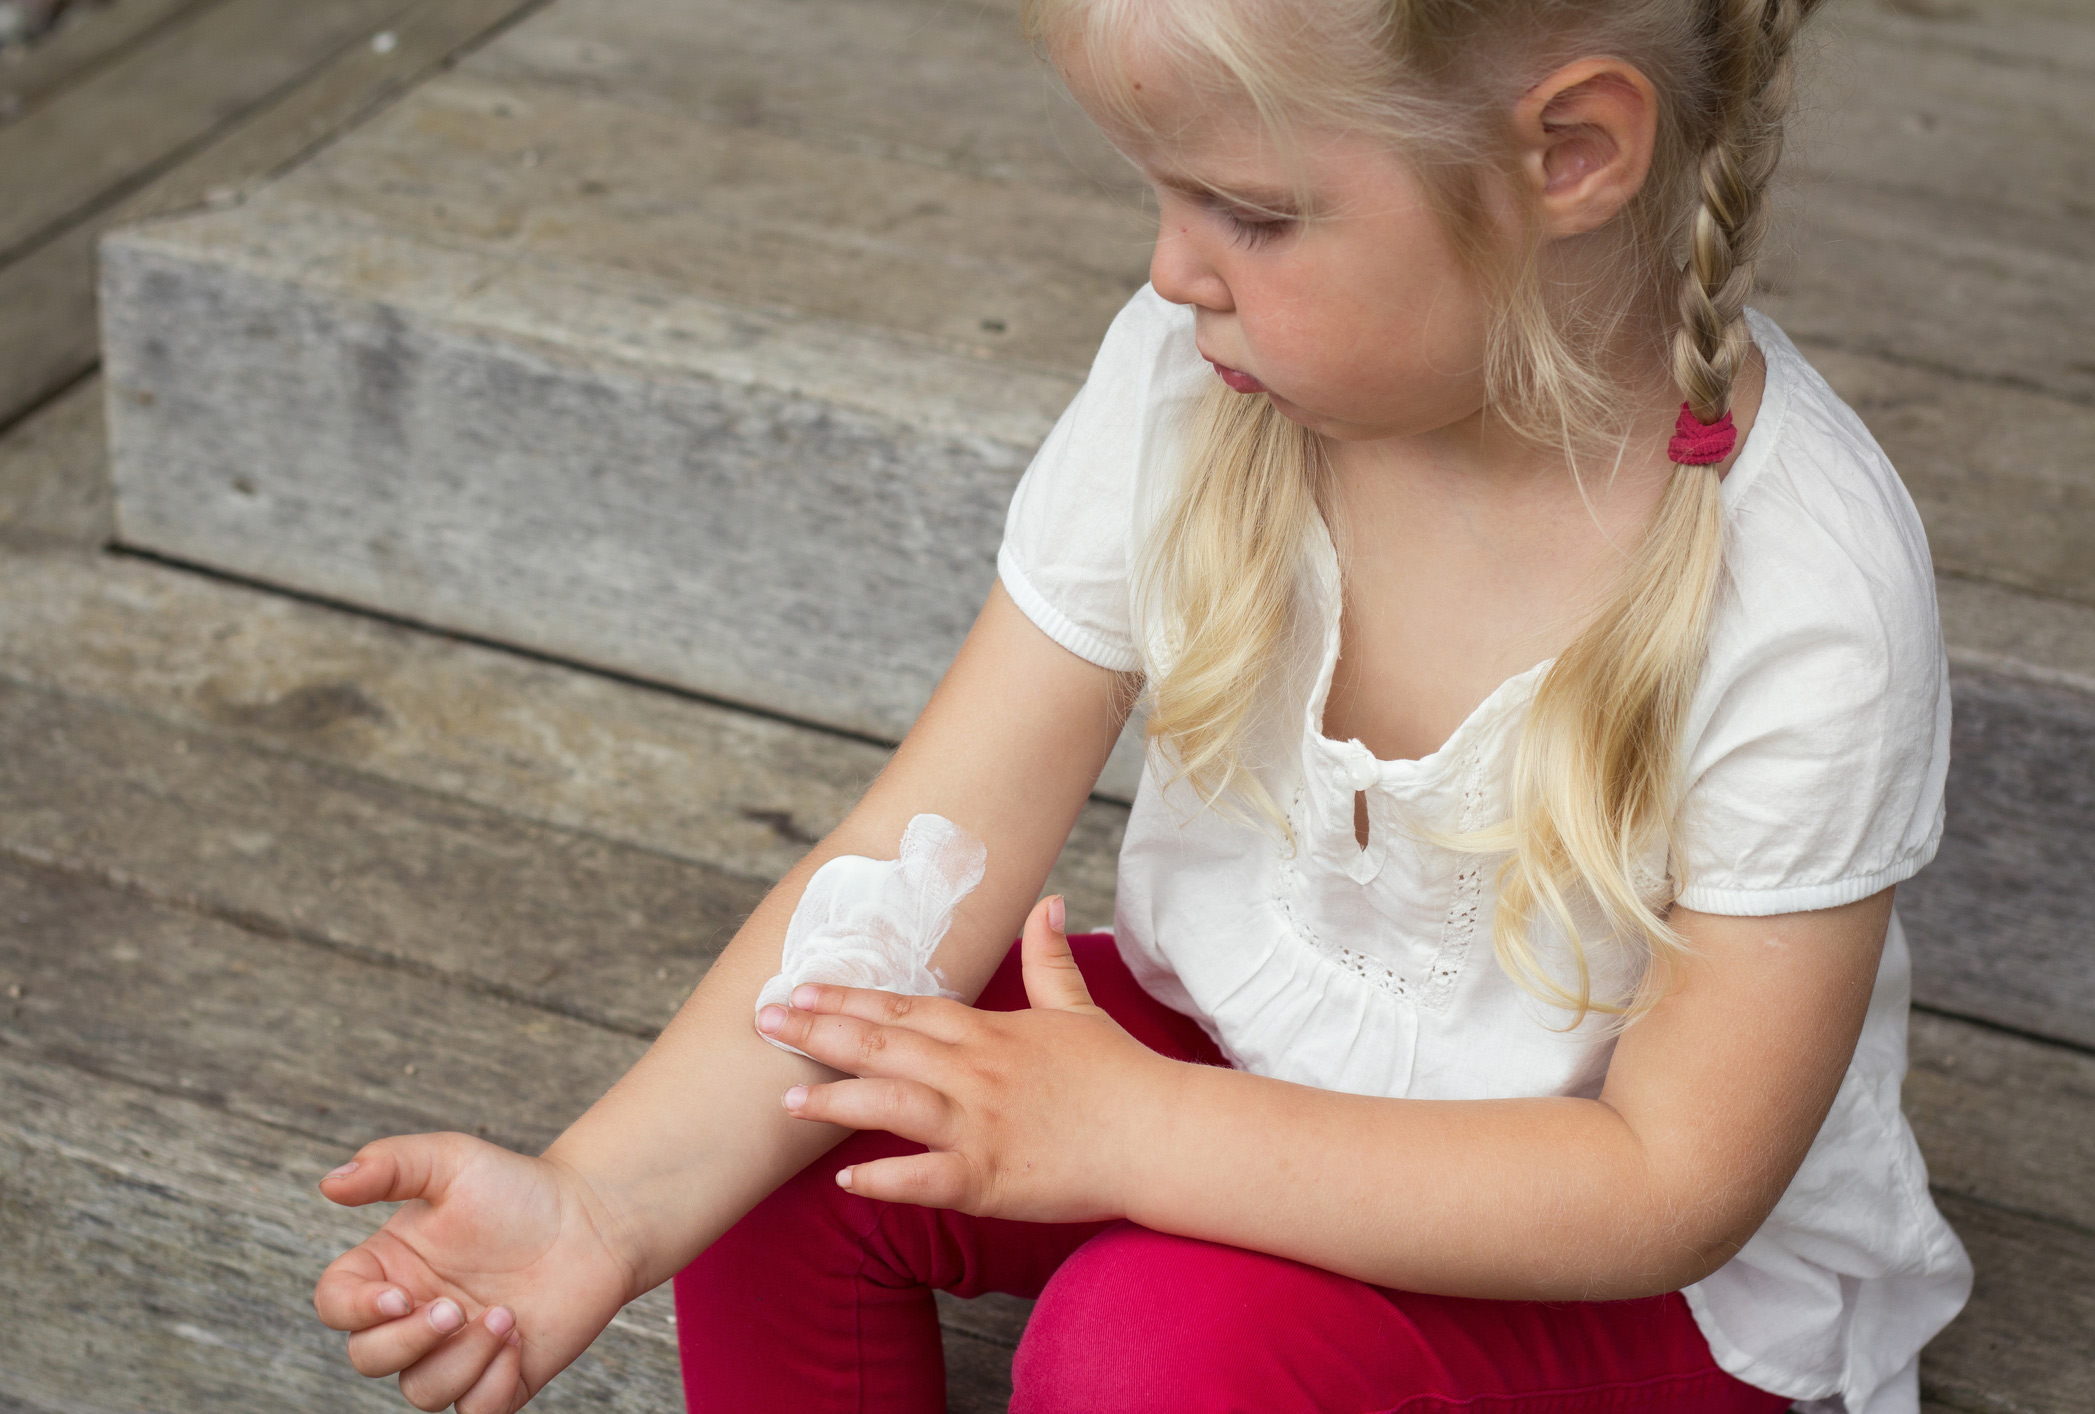 Eczema: the itch that doesn’t stop